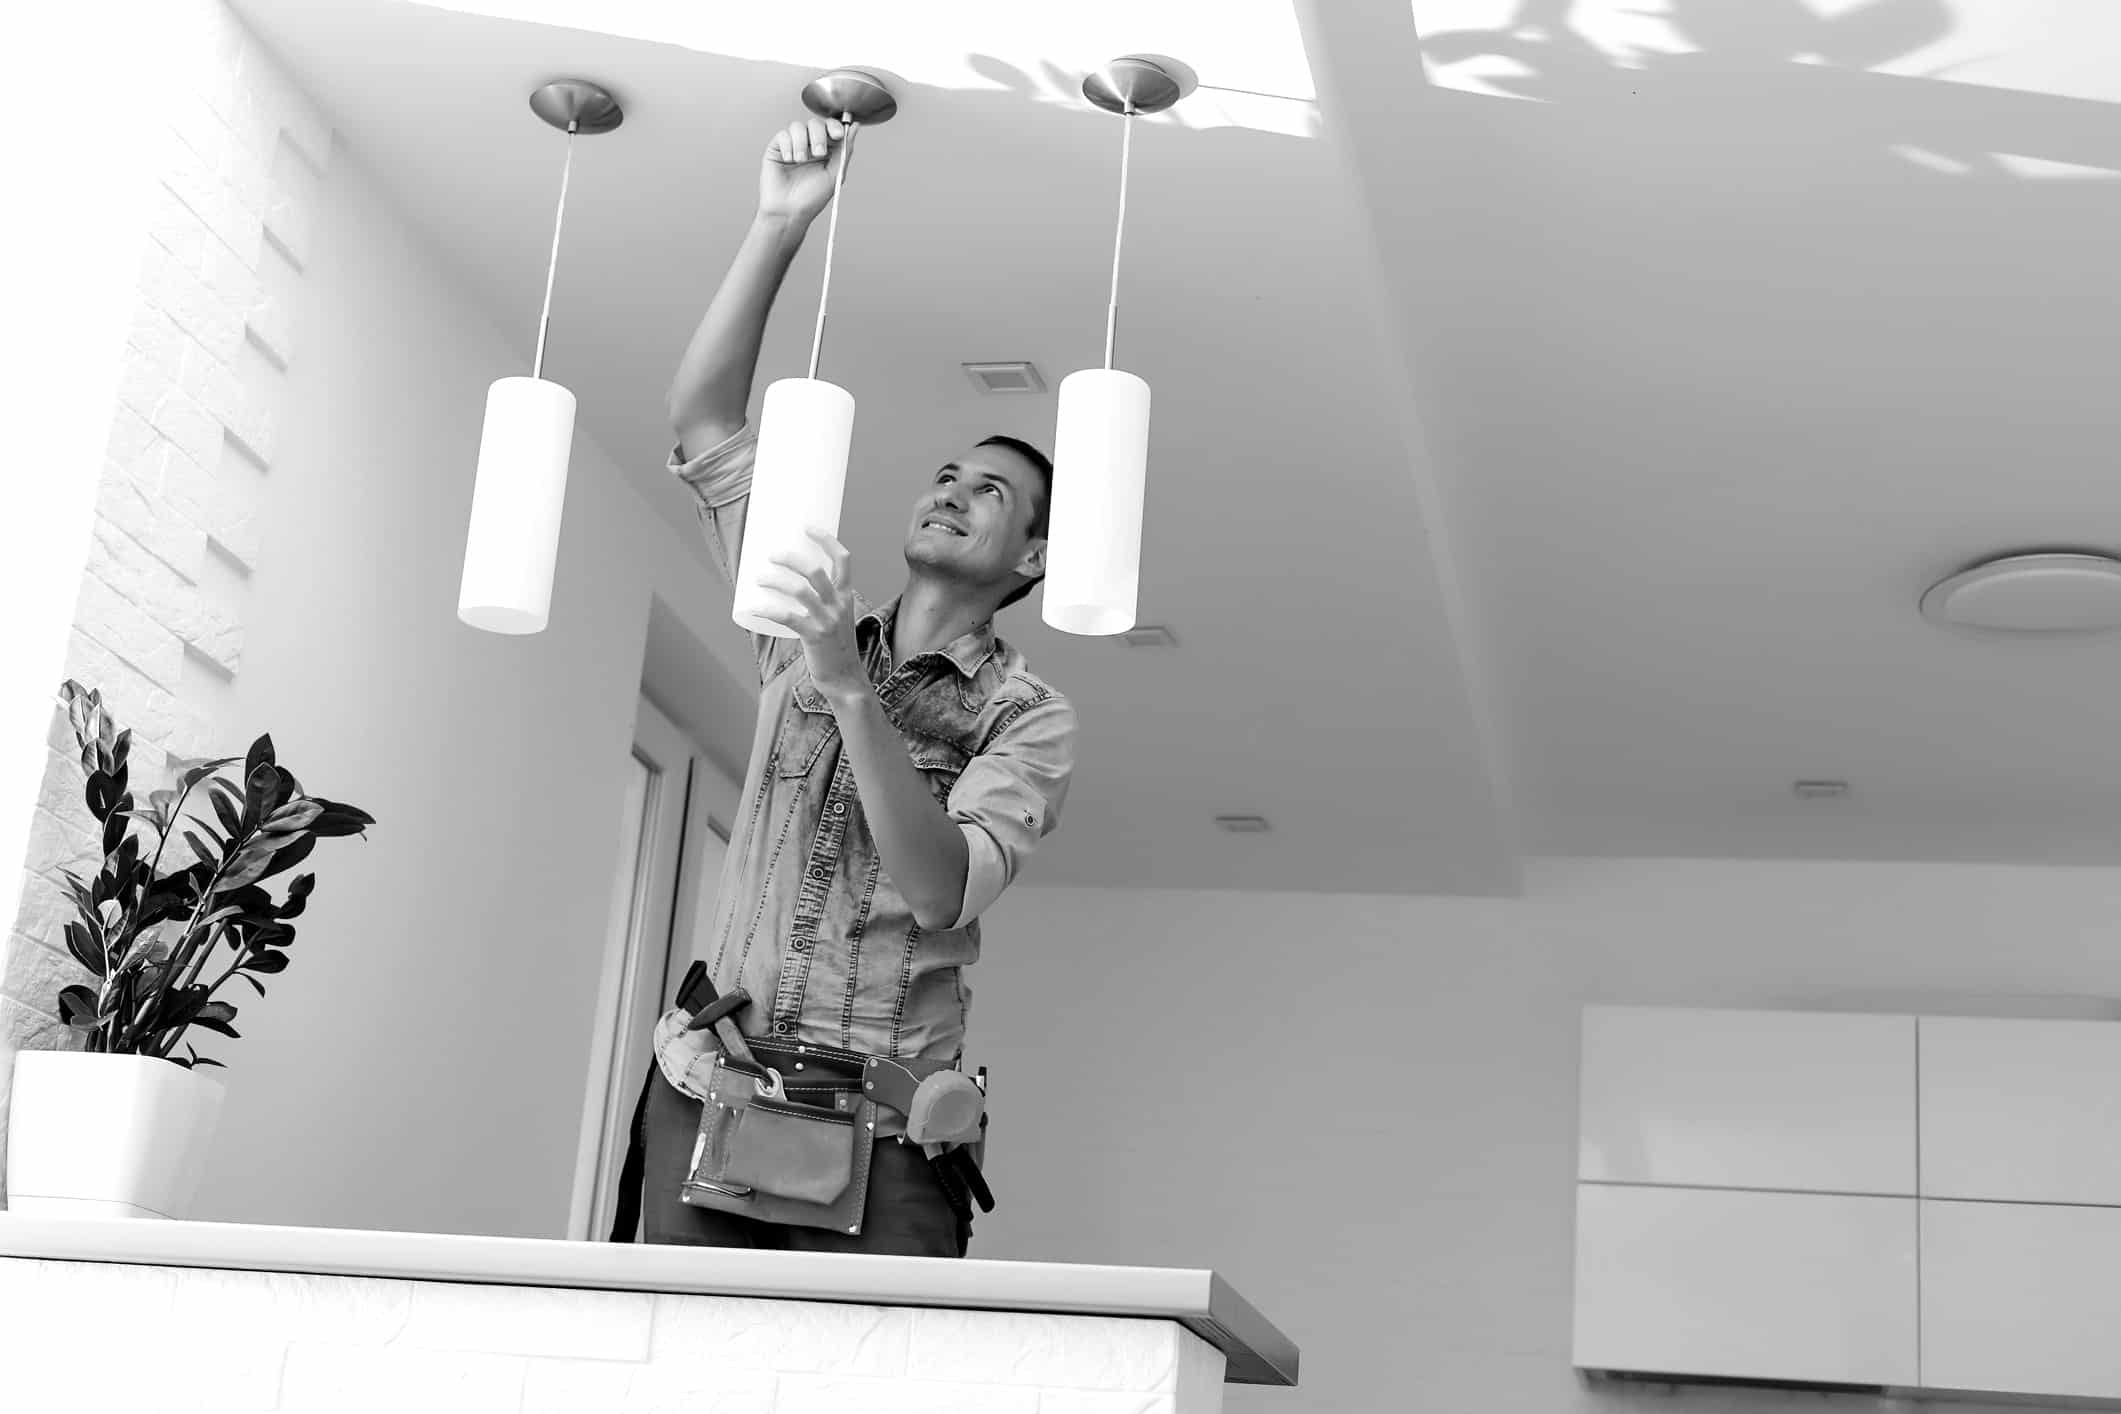 Best Handyman New Hampshire - Electrical Services